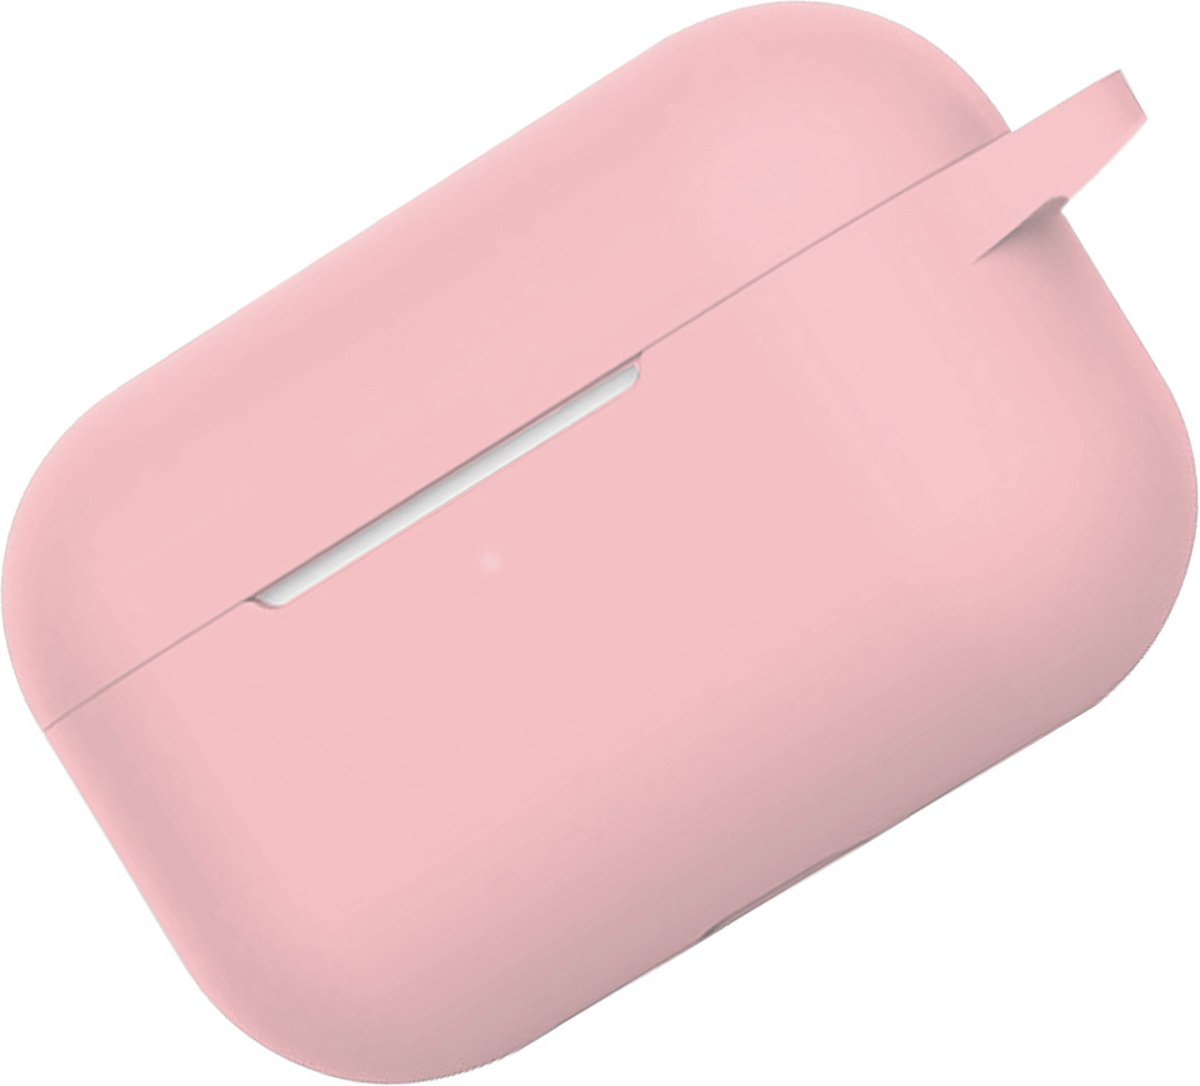 Hoes Geschikt voor Airpods Pro Hoesje Cover Silicone Case Hoes - Lichtroze